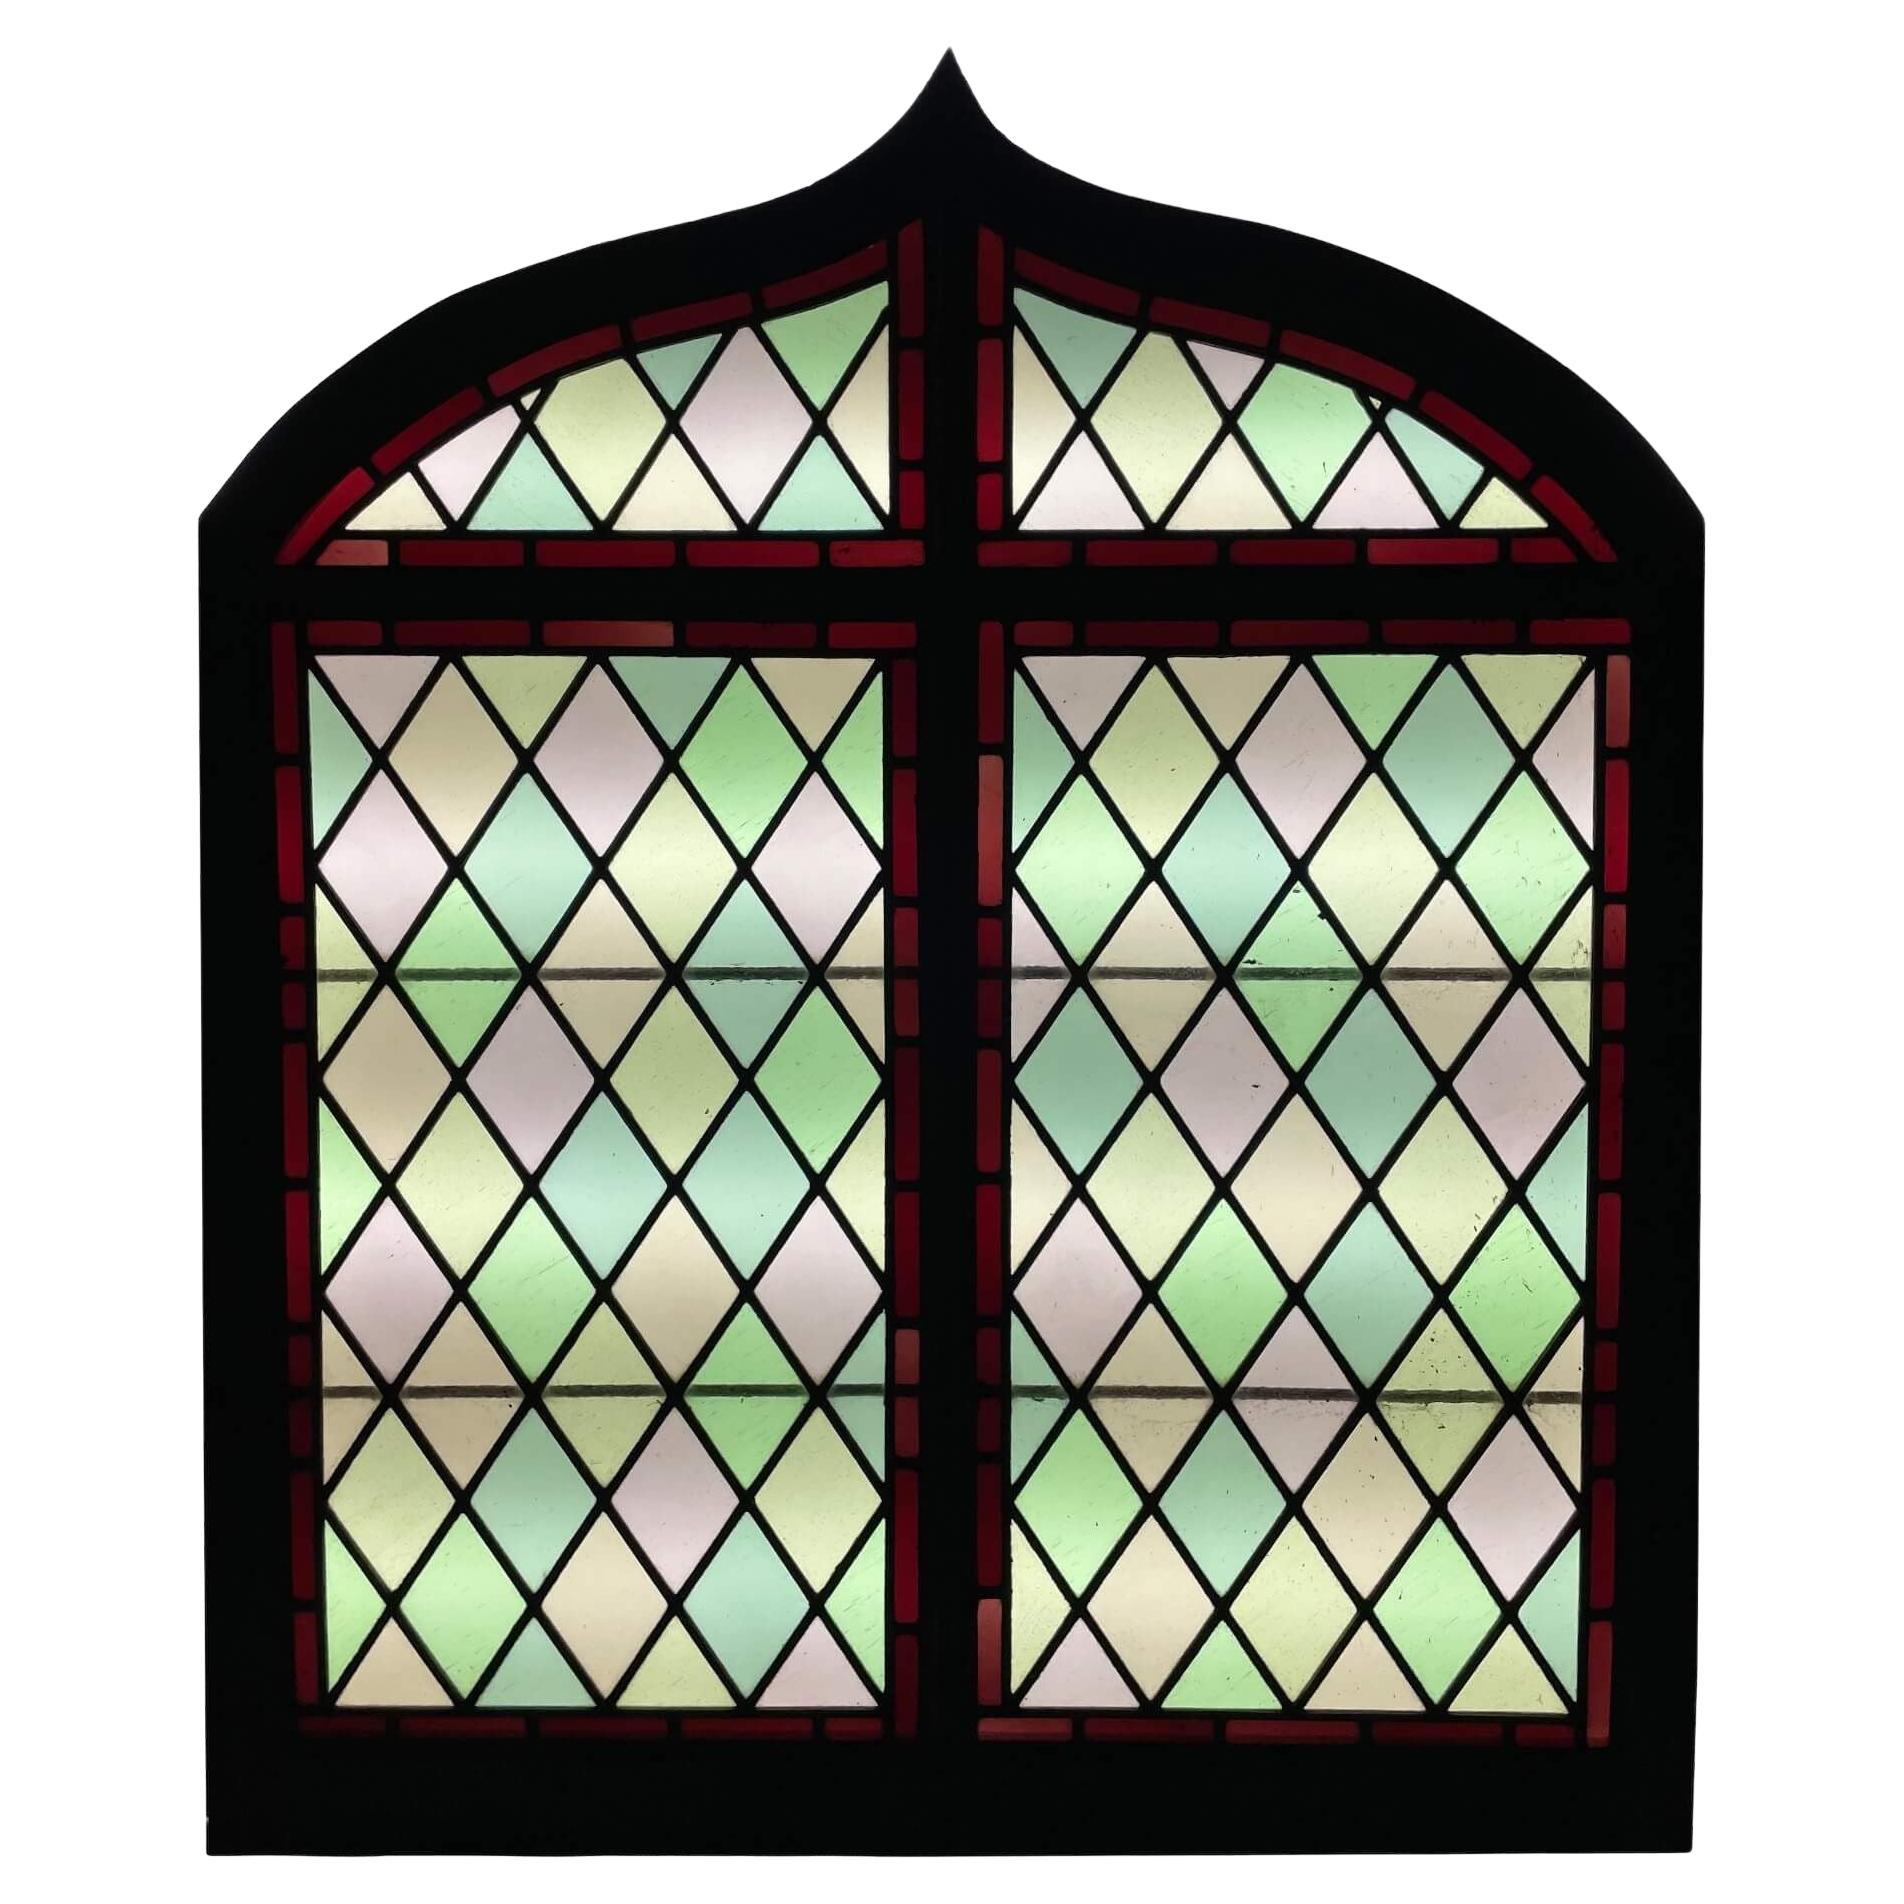 What is an arched window called?